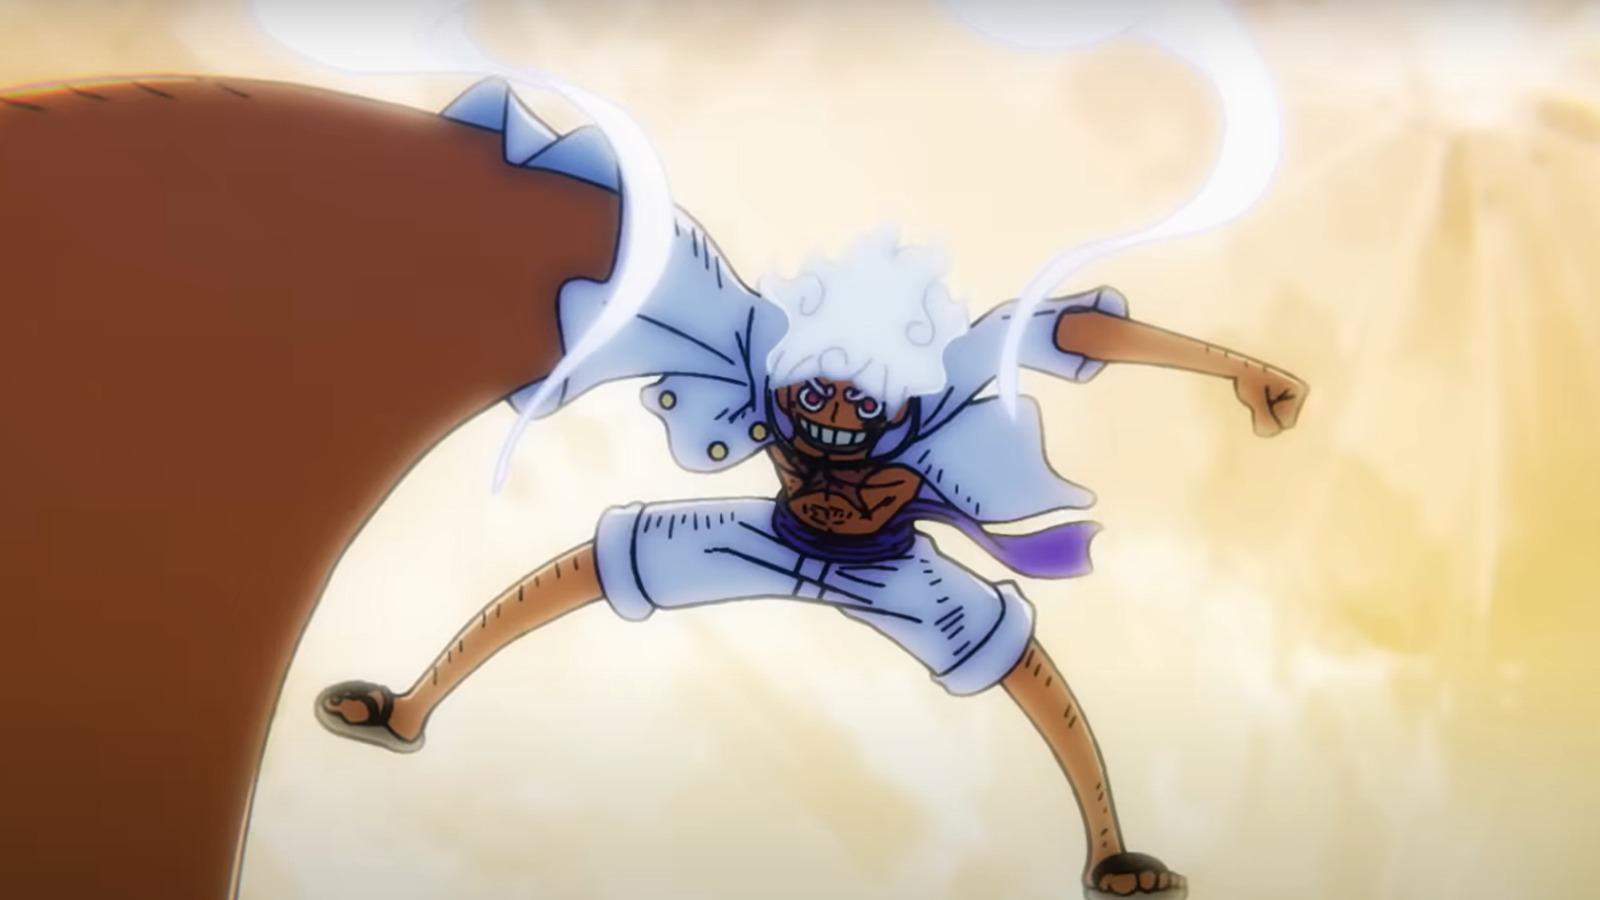 One Piece Anime Teases More Luffy and Gear 5 With Special Images